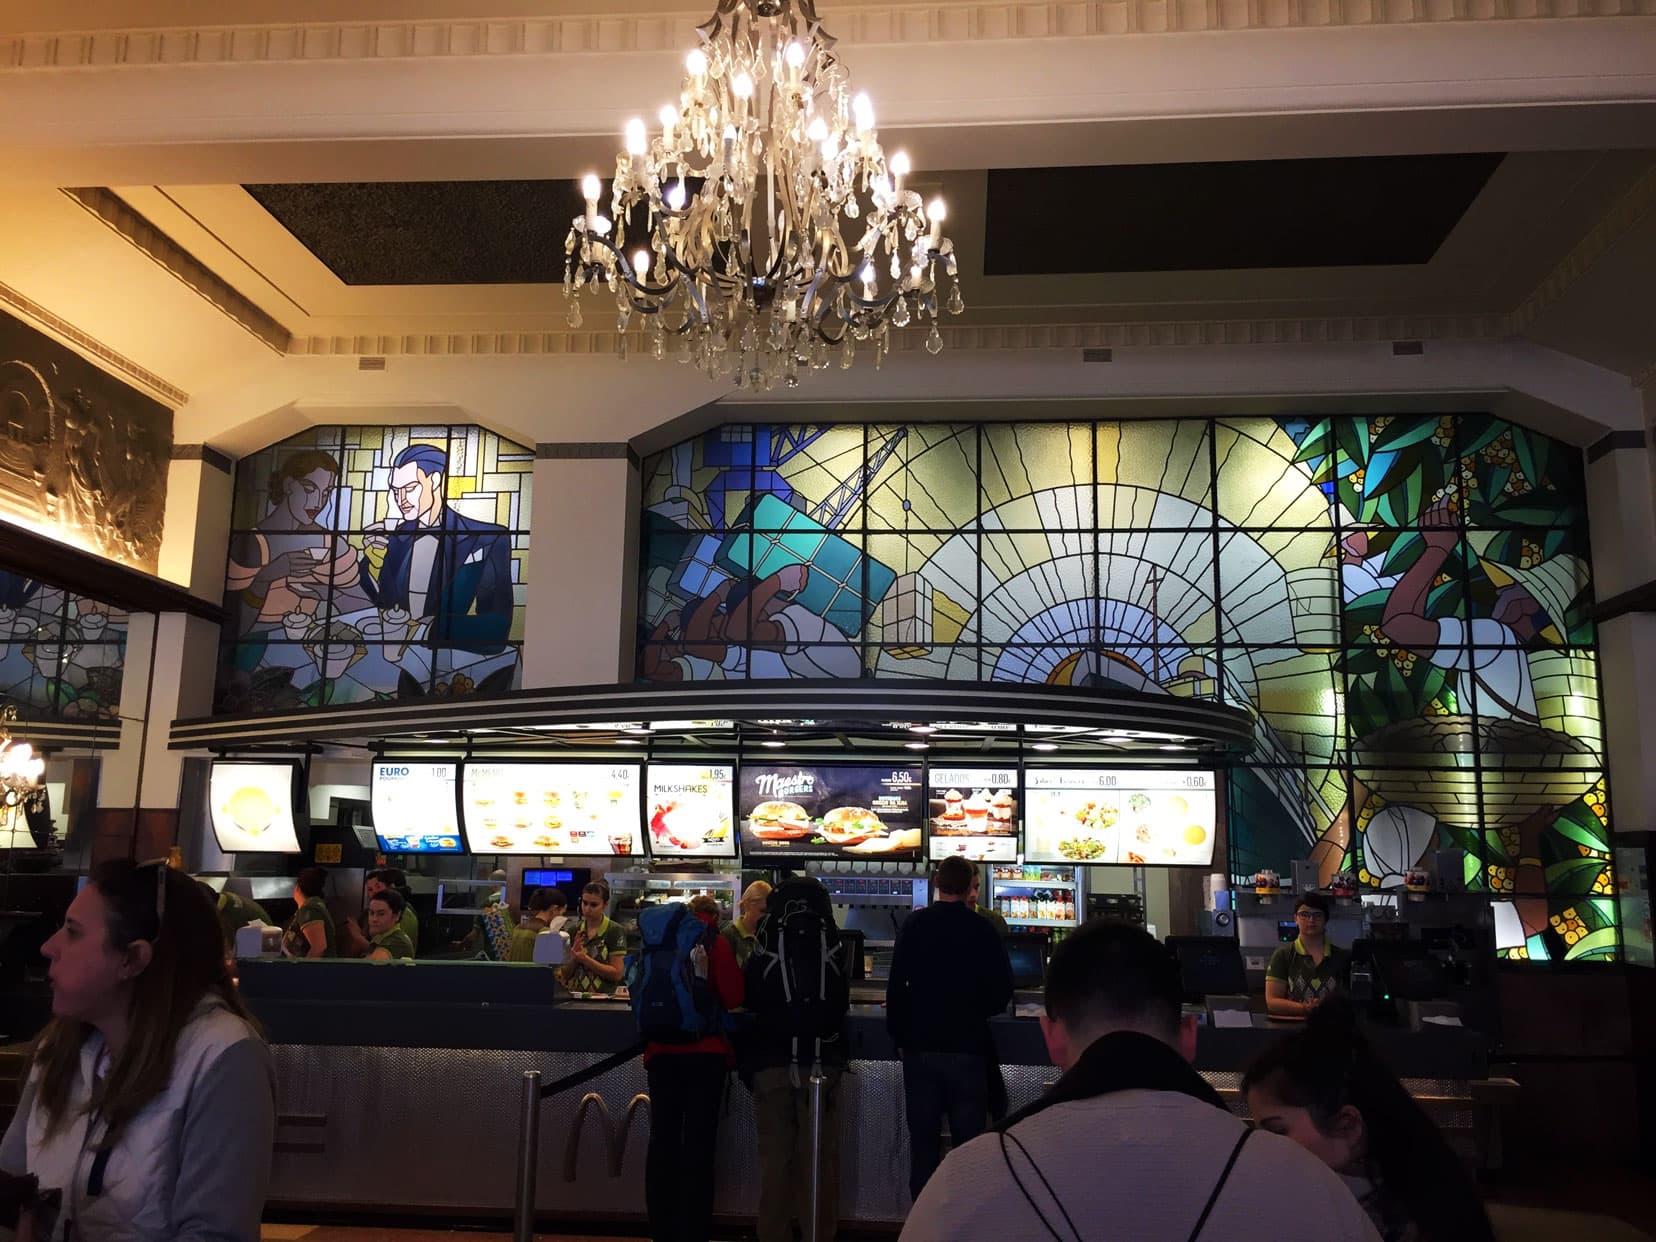 the inside of the Macdonalds burger store in Porto with a chandelier and staiened glass window back drops